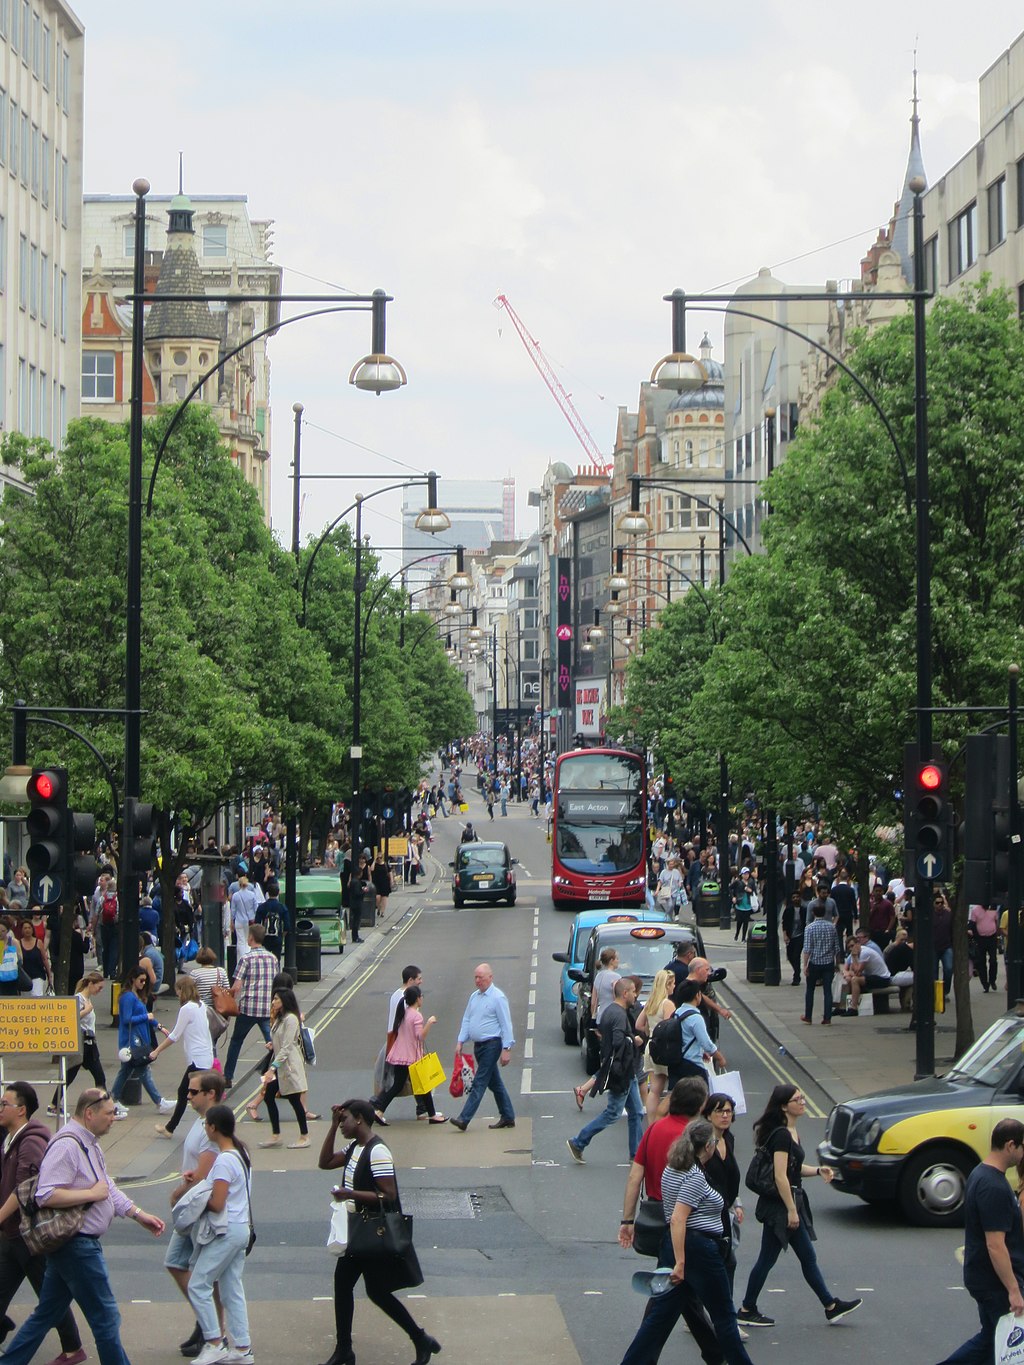 Oxford Street to be pedestrianised by 2020 - BBC News